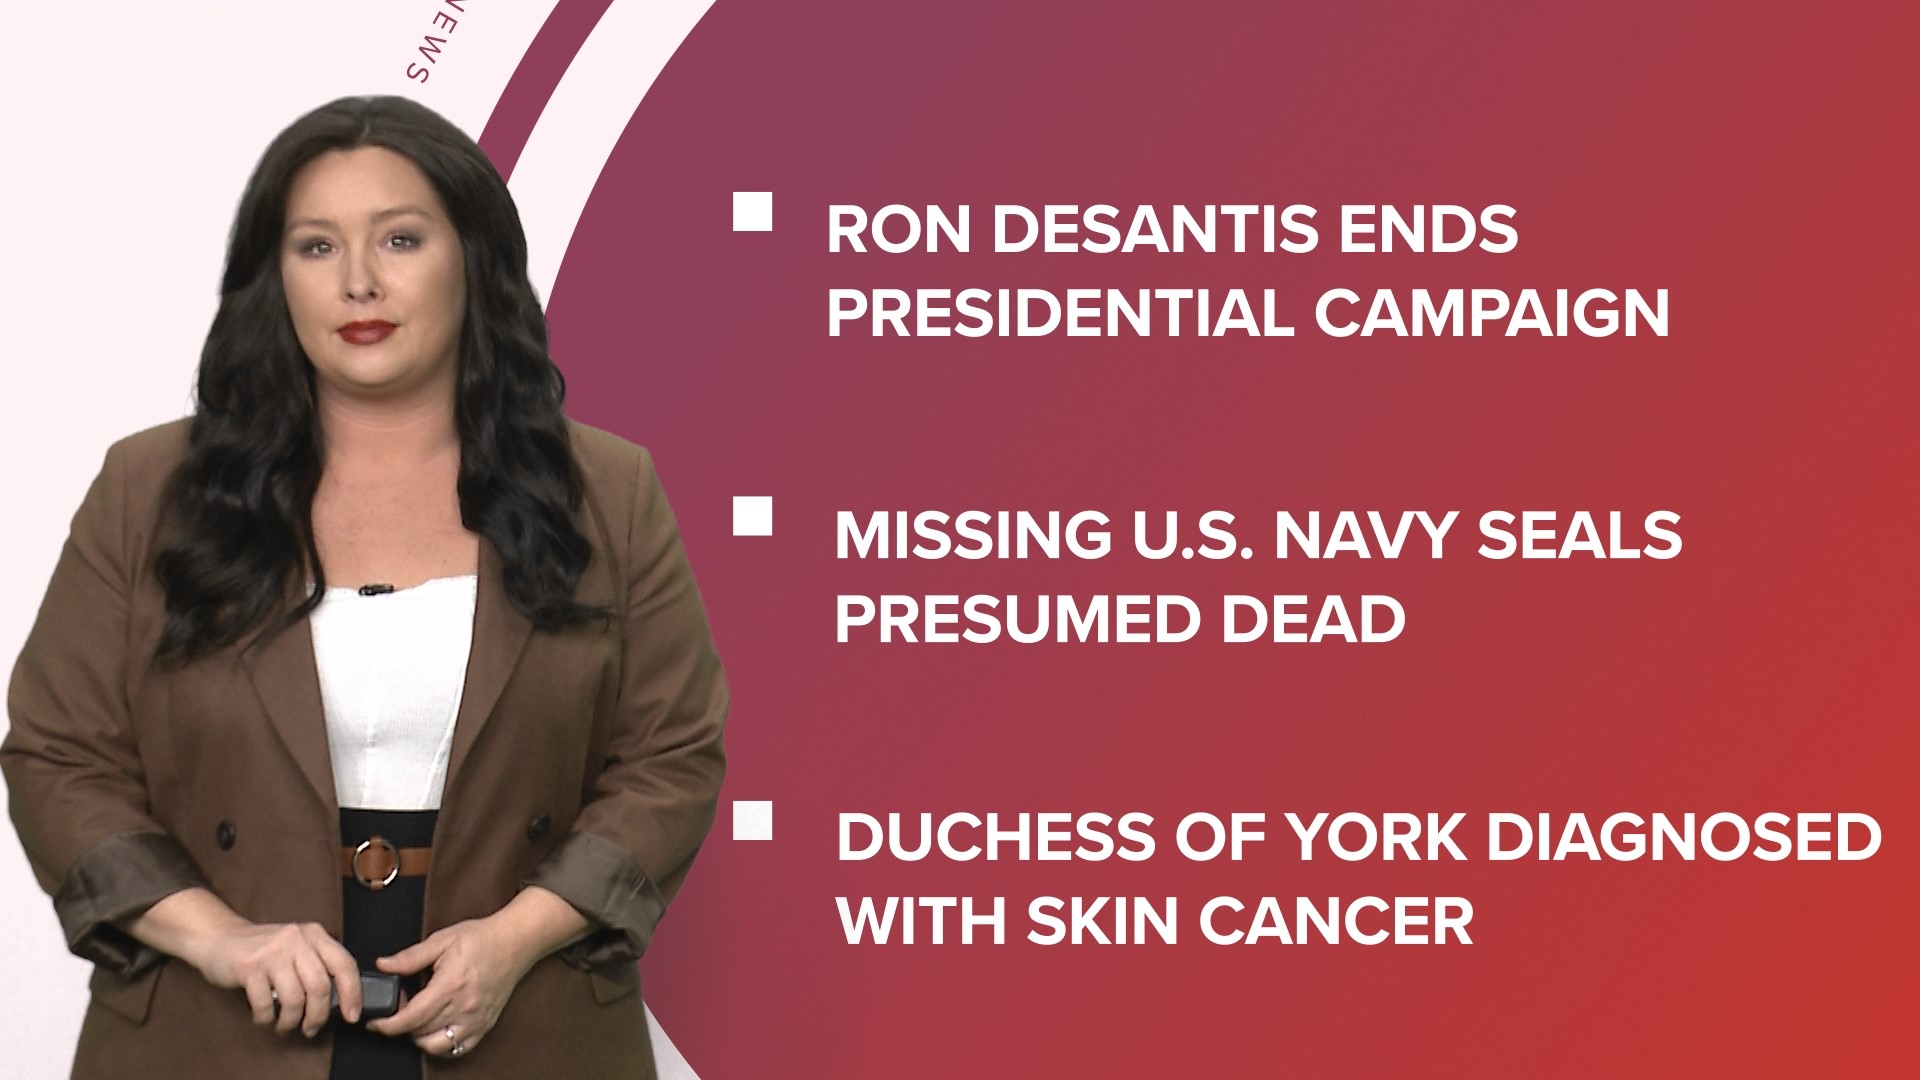 A look at what is happening in the news from Gov. Ron DeSantis ends his run for president to two U.S. Navy seals presumed dead and more student loan debt forgiven.